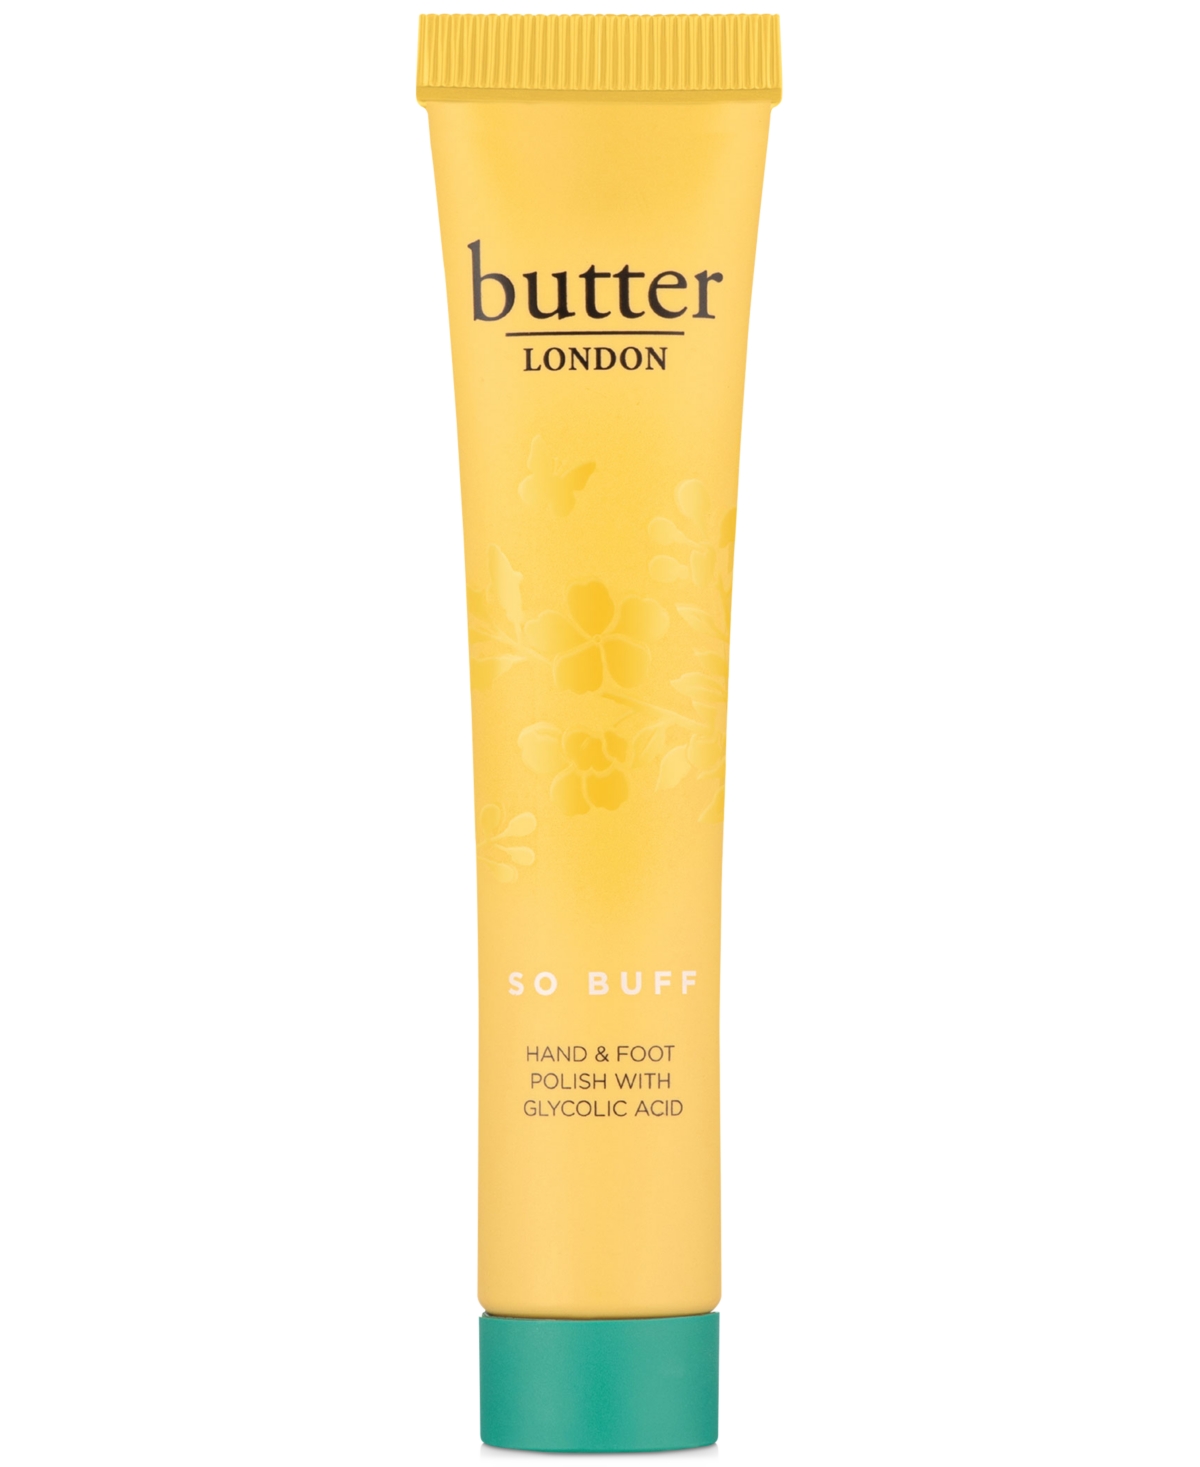 Butter London So Buff Hand & Foot Polish With Glycolic Acid, 1.48-oz. In N,a